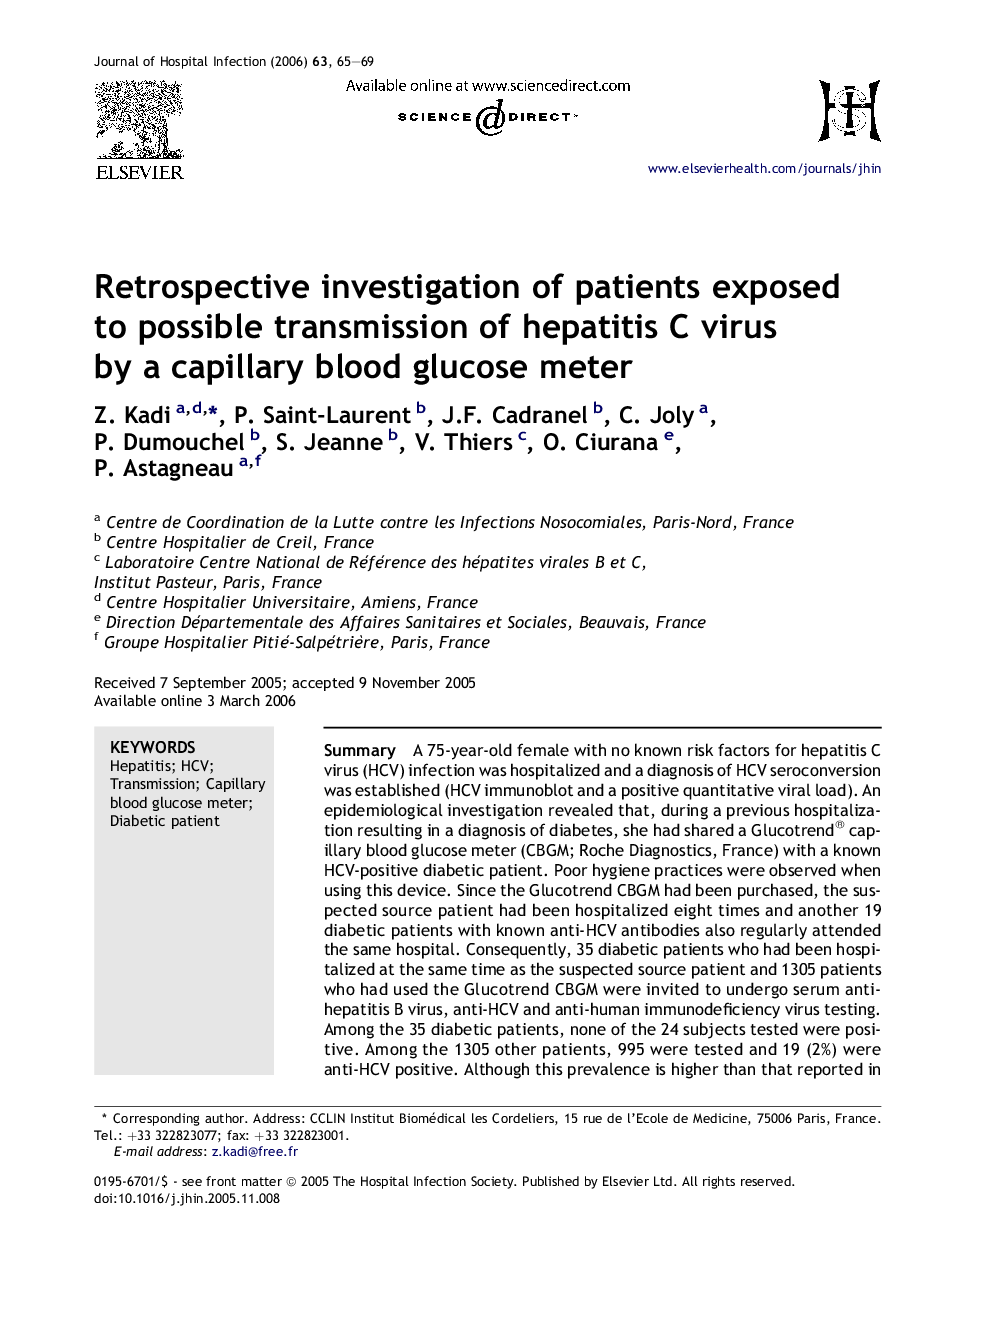 Retrospective investigation of patients exposed to possible transmission of hepatitis C virus by a capillary blood glucose meter